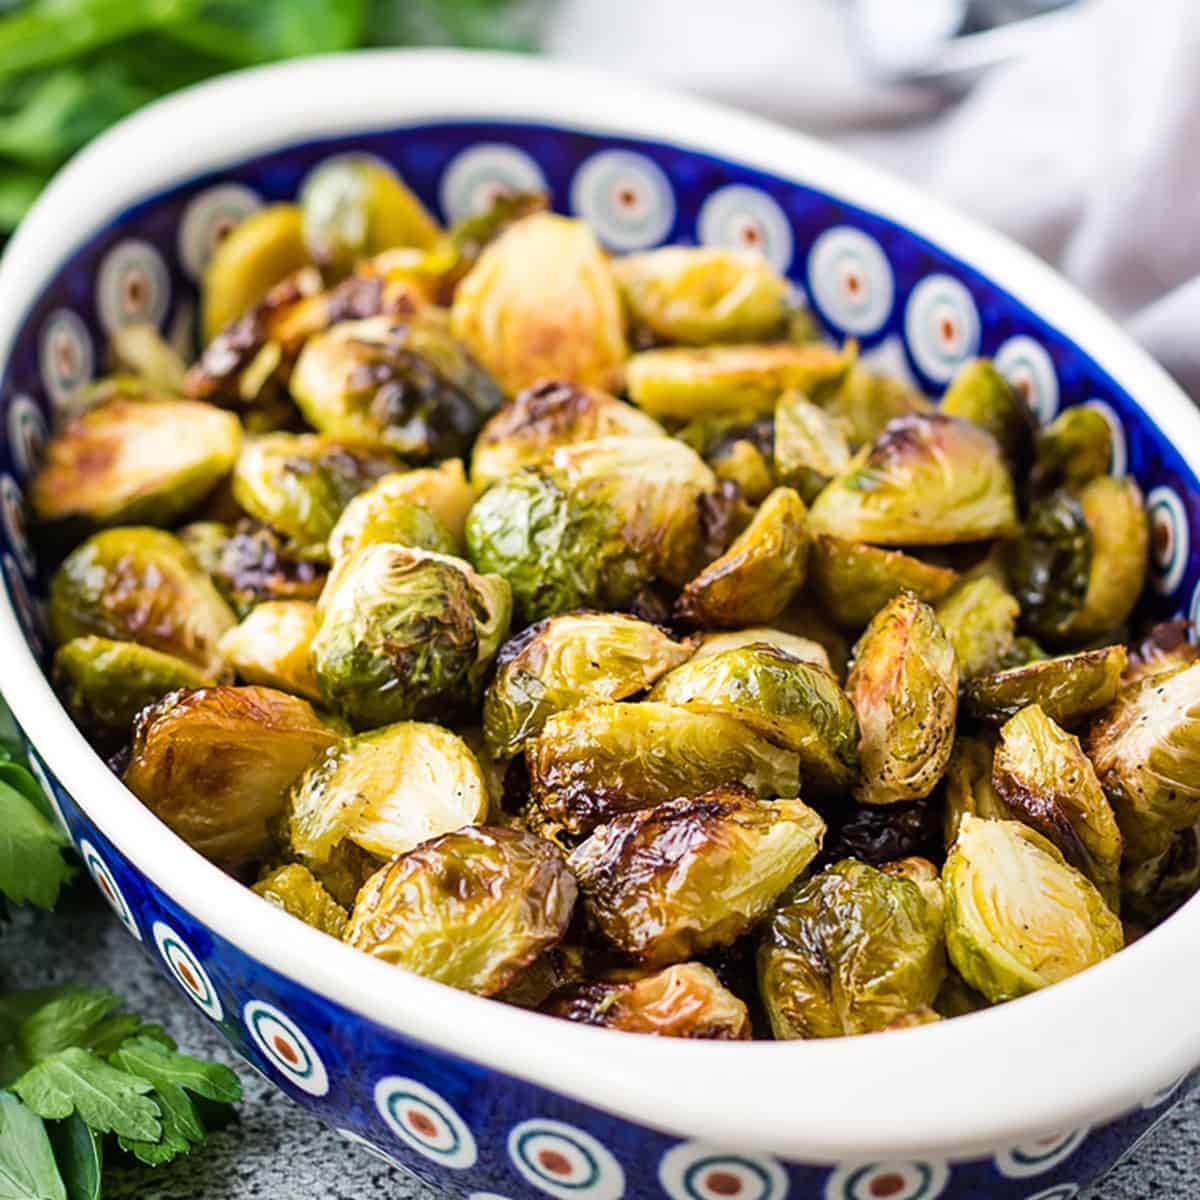 Blue oval dish filled with roasted brussel sprouts.